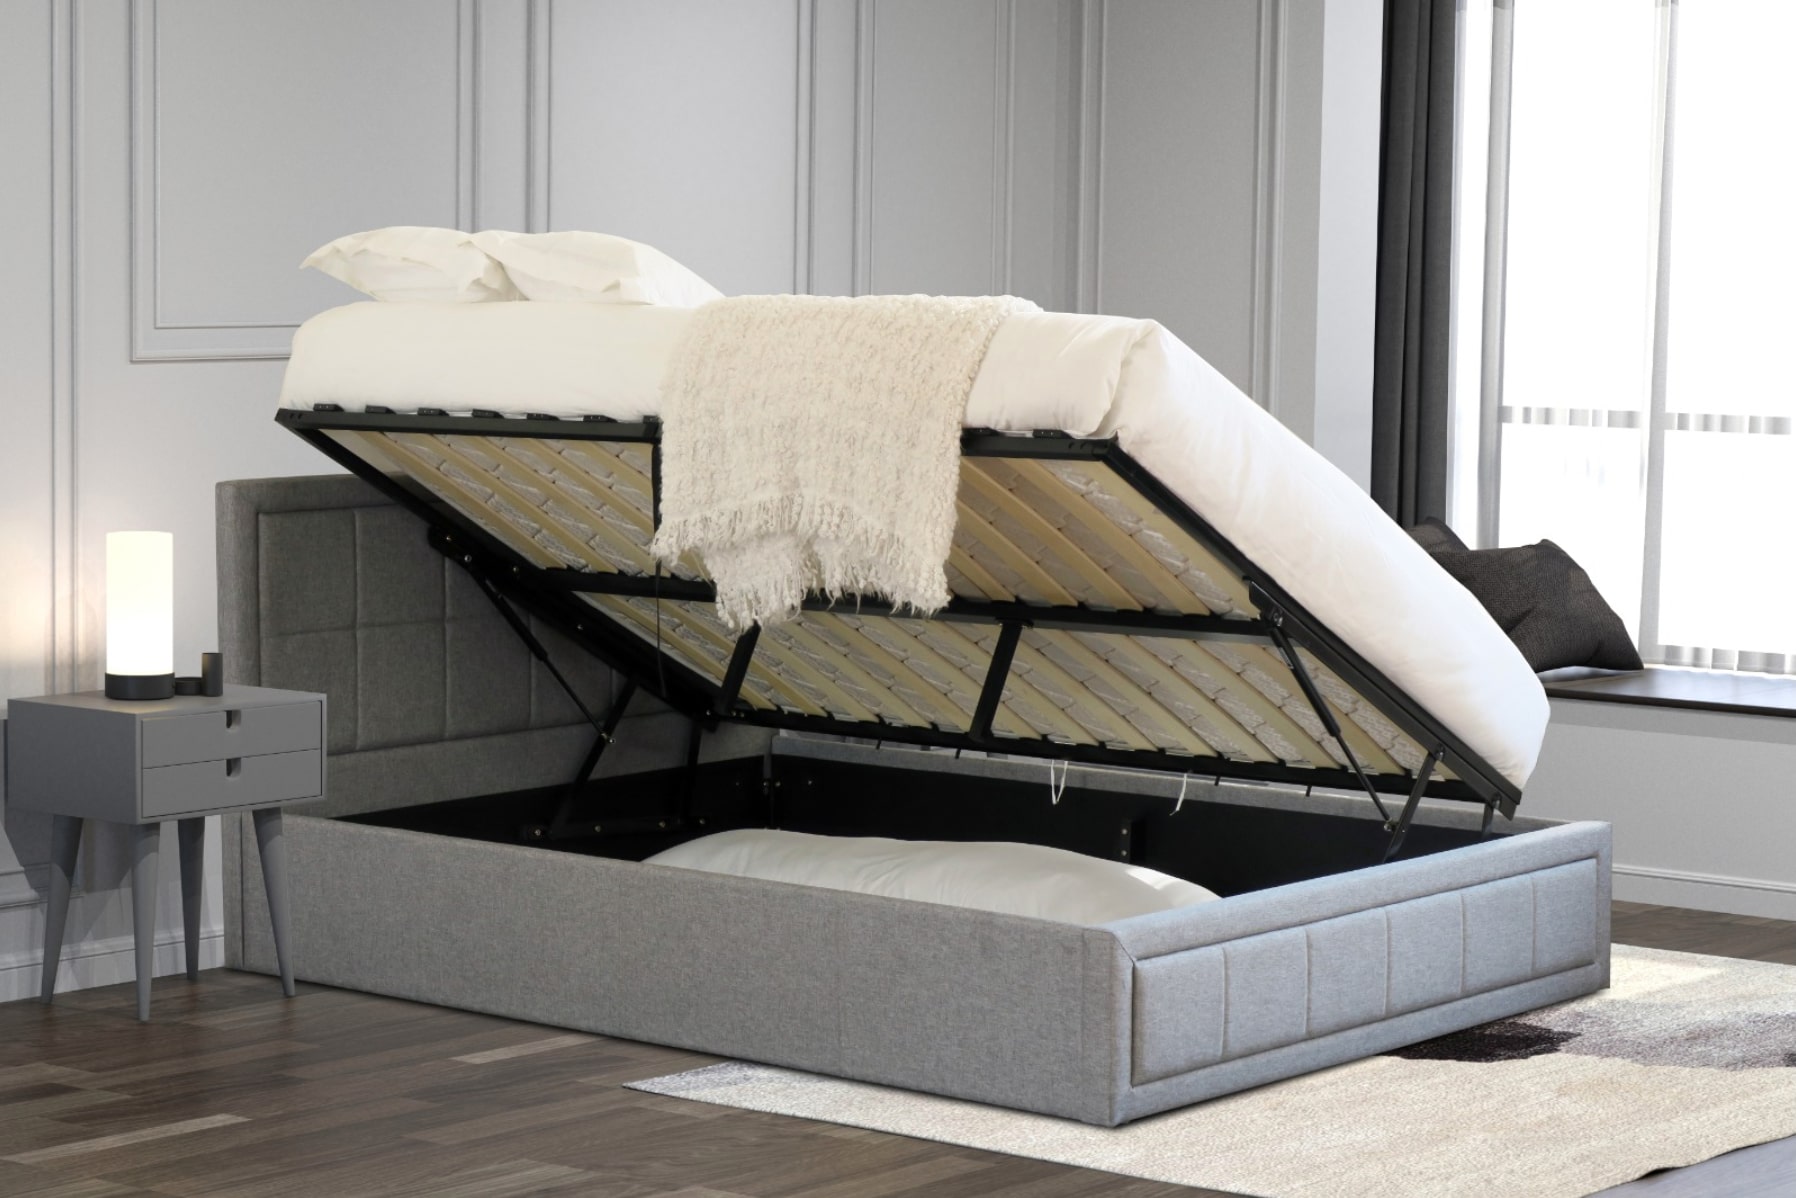 single side opening ottoman bed with mattress